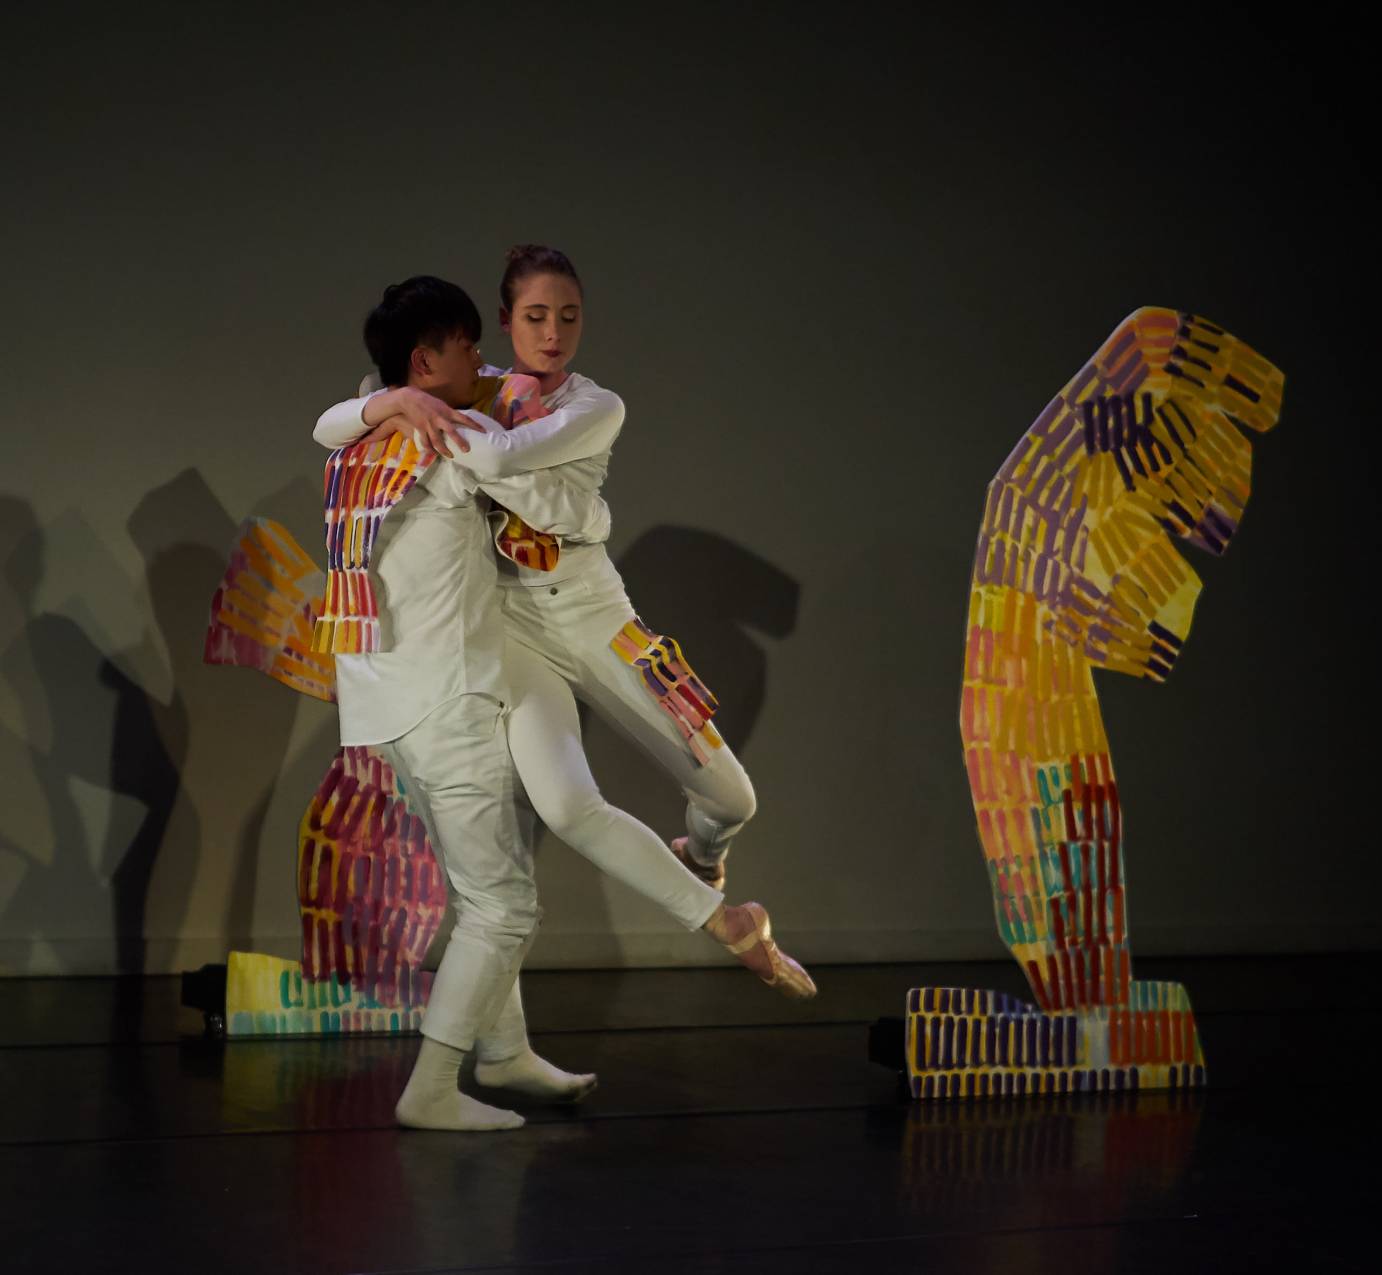 A man with his back to the audience lifts a woman. She is nestled into the side of his body with her arms around his shoulders. They are both costumed in long white pants and shirts with yellow, orange and red woven fabric attached to their costumes at various places. A sculpture in the same colors stands at their height to the right of them.